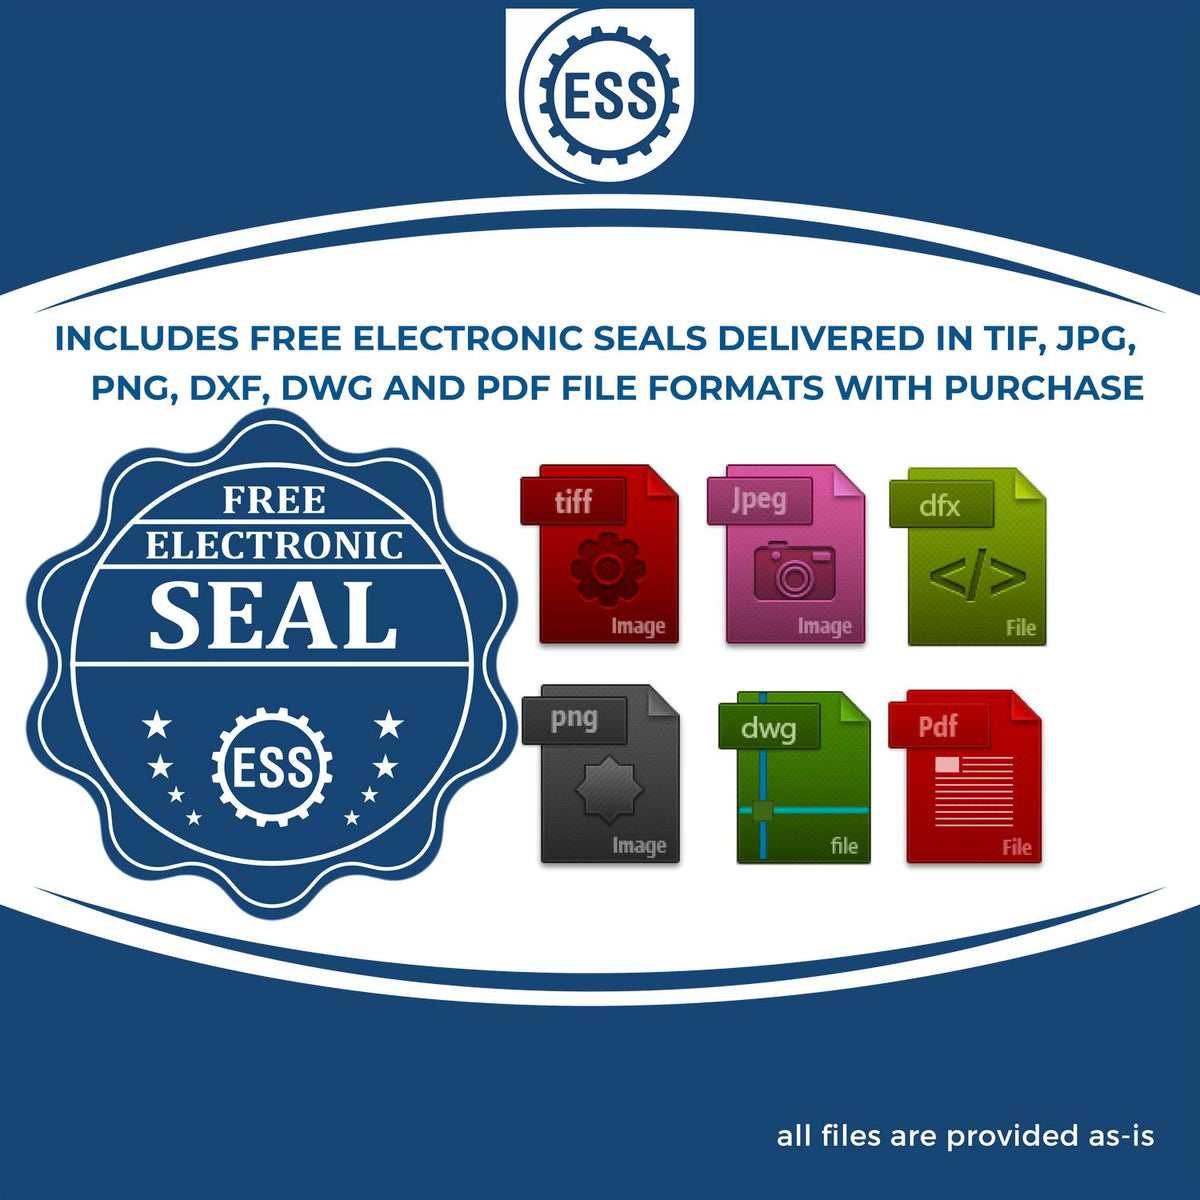 An infographic for the free electronic seal for the Slim Pre-Inked Iowa Land Surveyor Seal Stamp illustrating the different file type icons such as DXF, DWG, TIF, JPG and PNG.